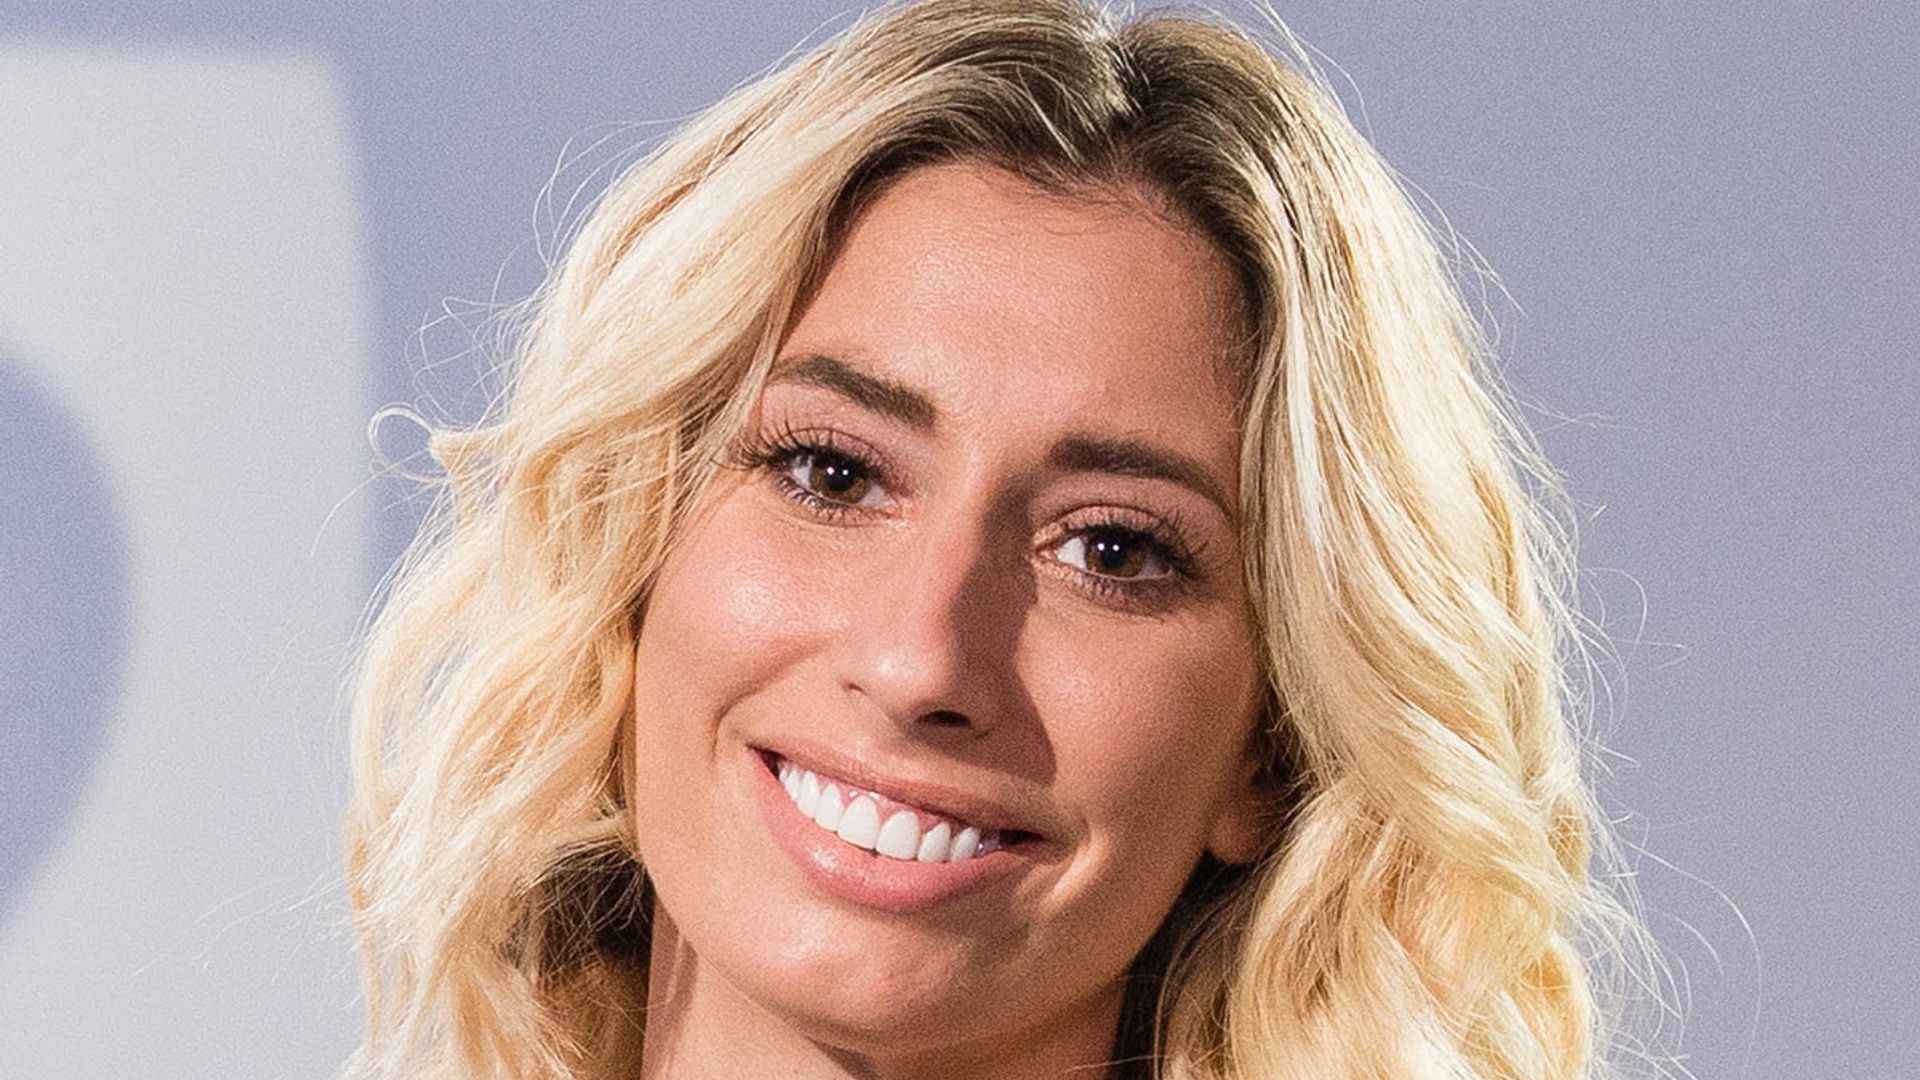 stacey-solomon-smiles-for-camera-